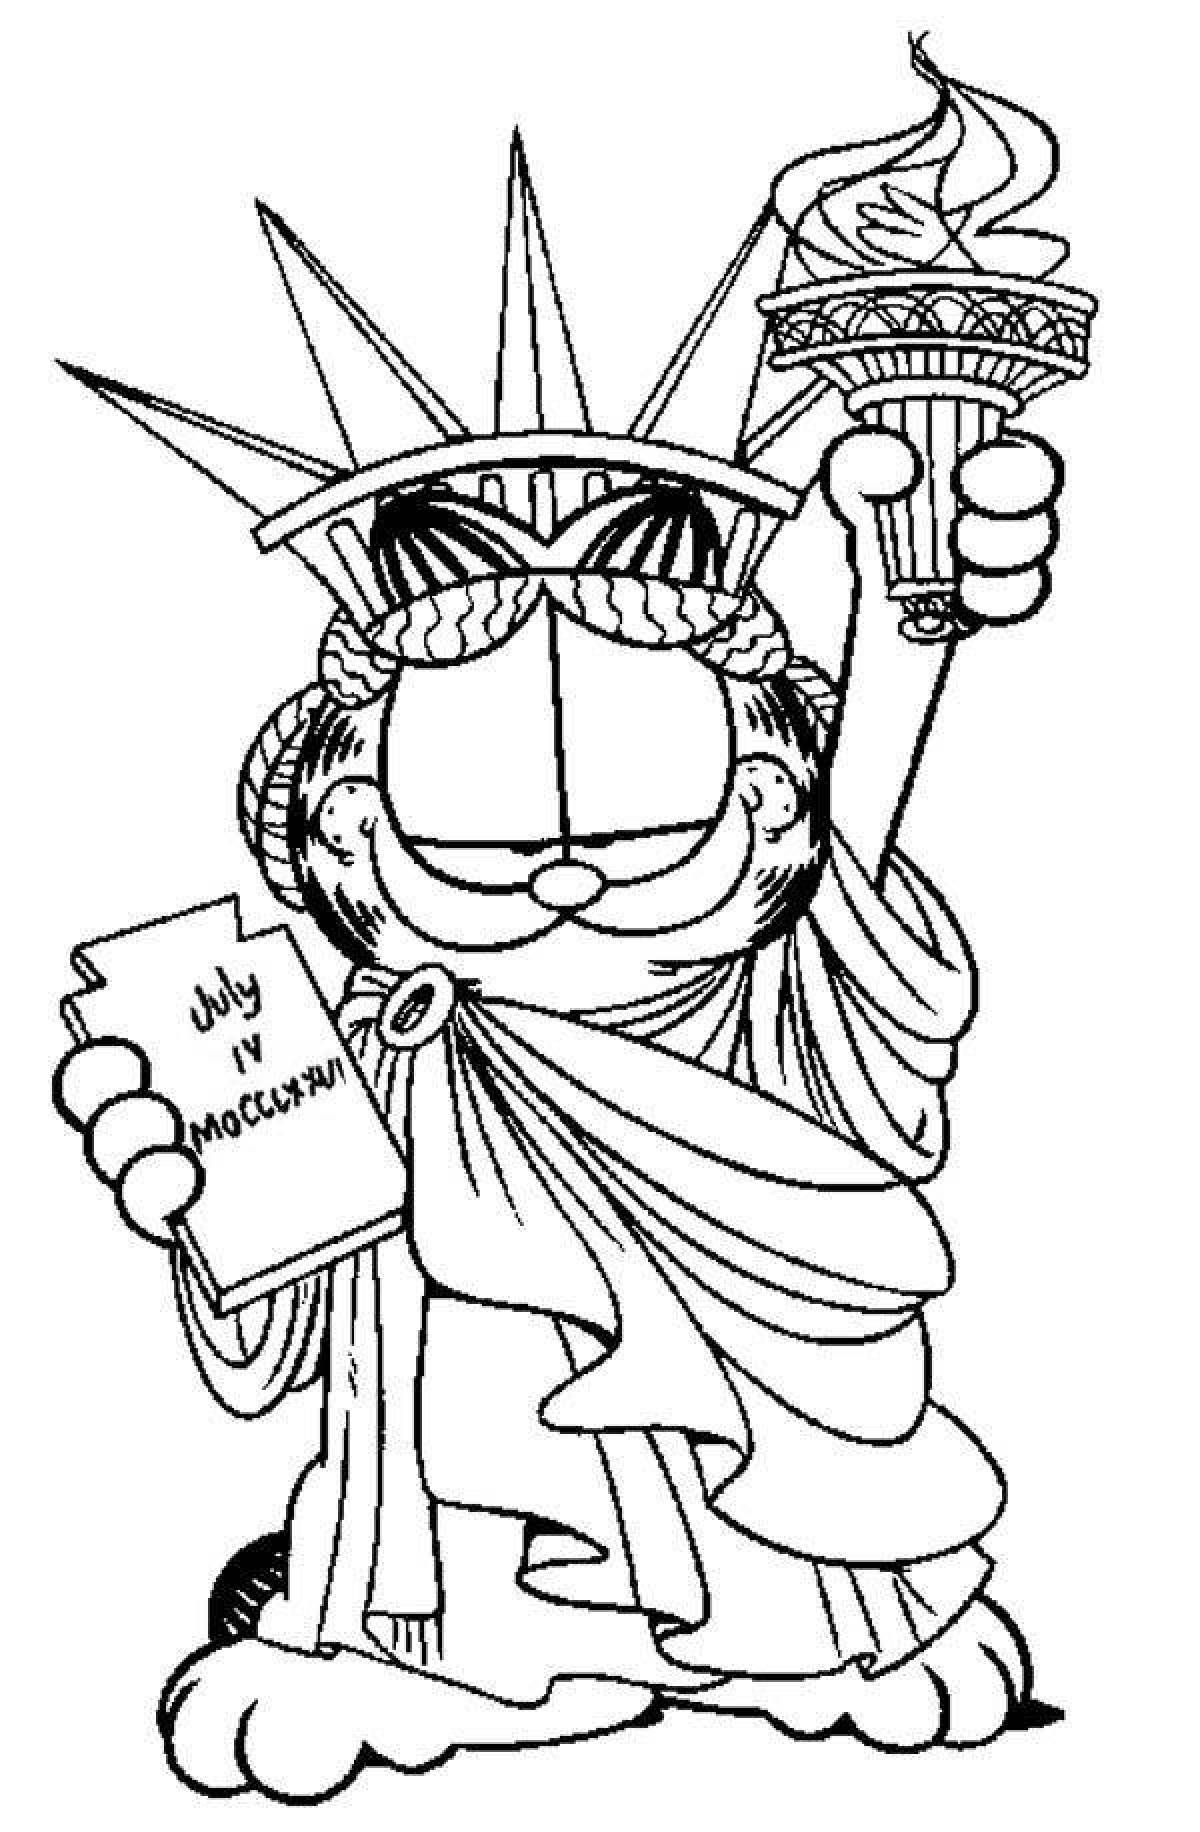 Coloring the great statue of liberty